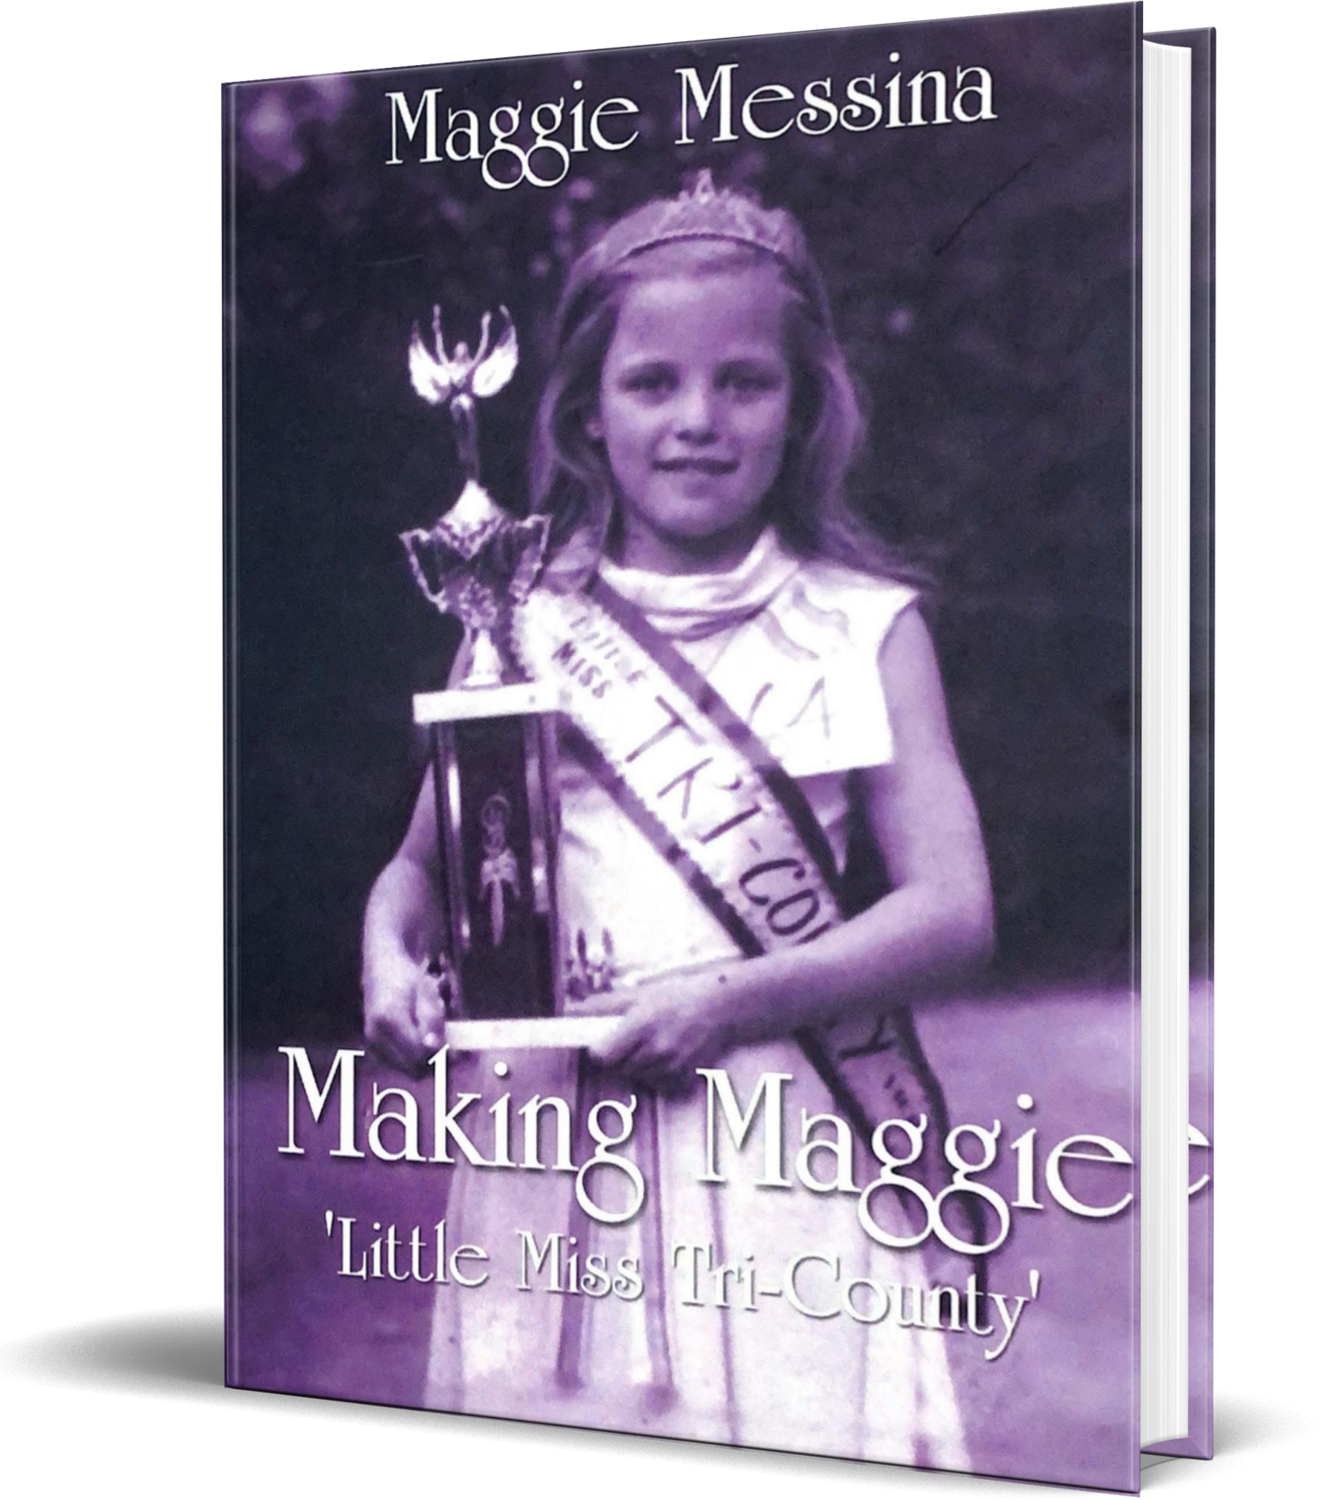 Making Maggie 'Little Miss Tri-County'